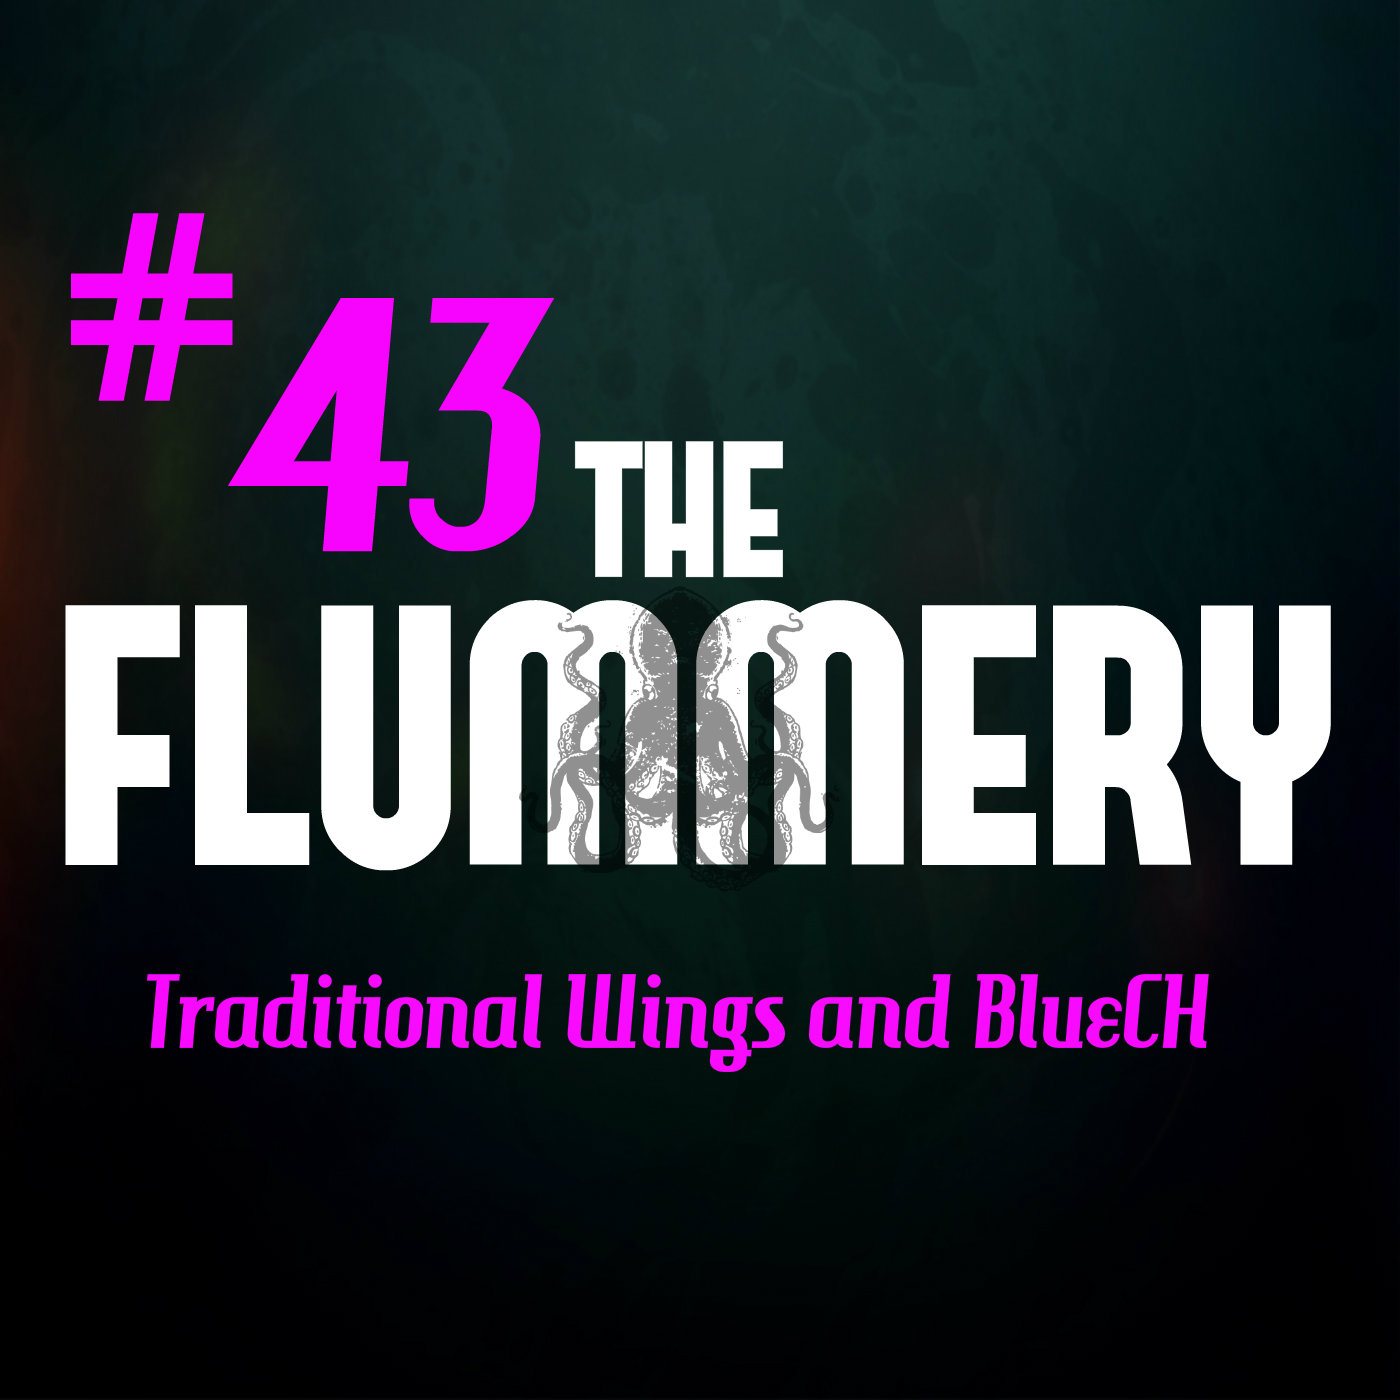 #43. Traditional Wings and BlueCH